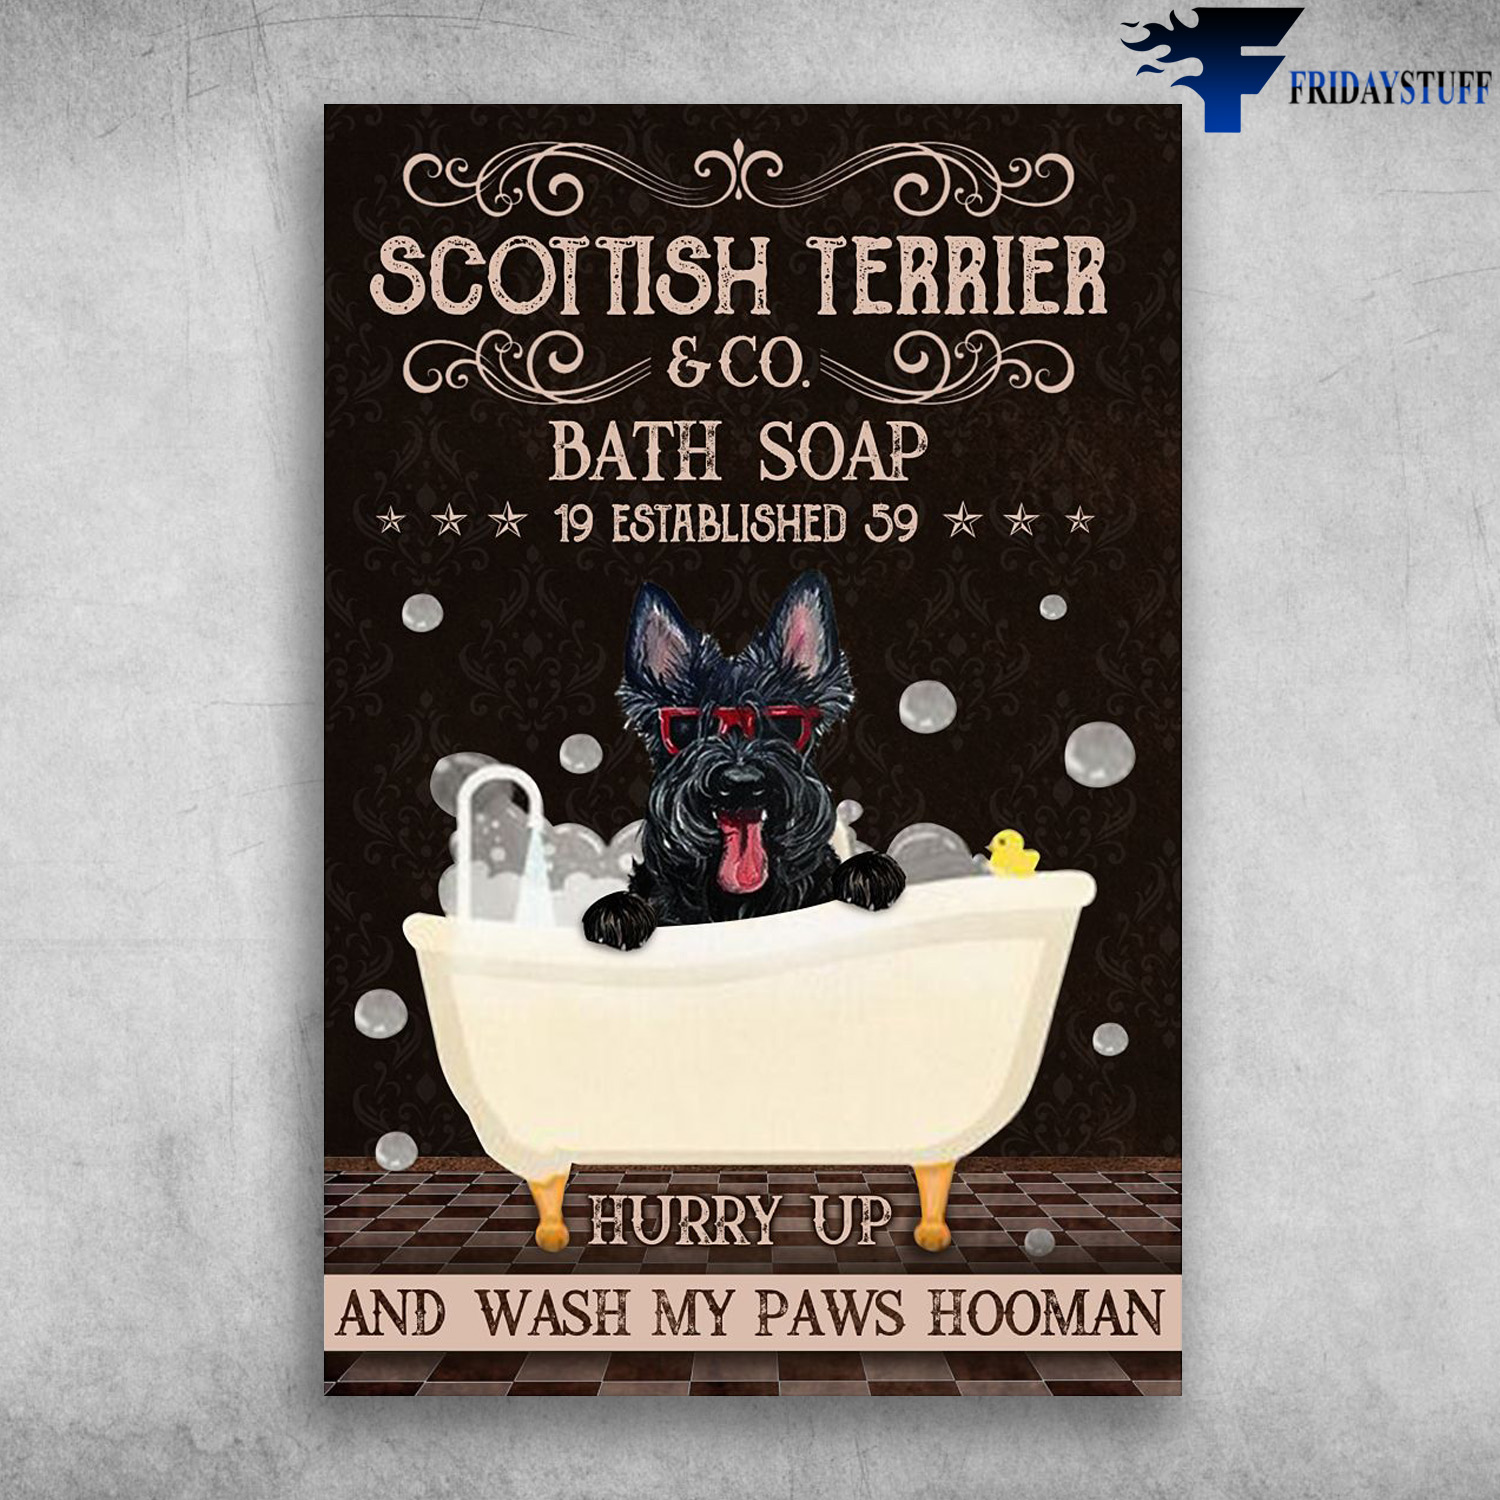 Scottish Terrier - Scottish Terrier And Co. Bath Soap, 19 Established 59, Hurry Up And Wash My Paws Hooman